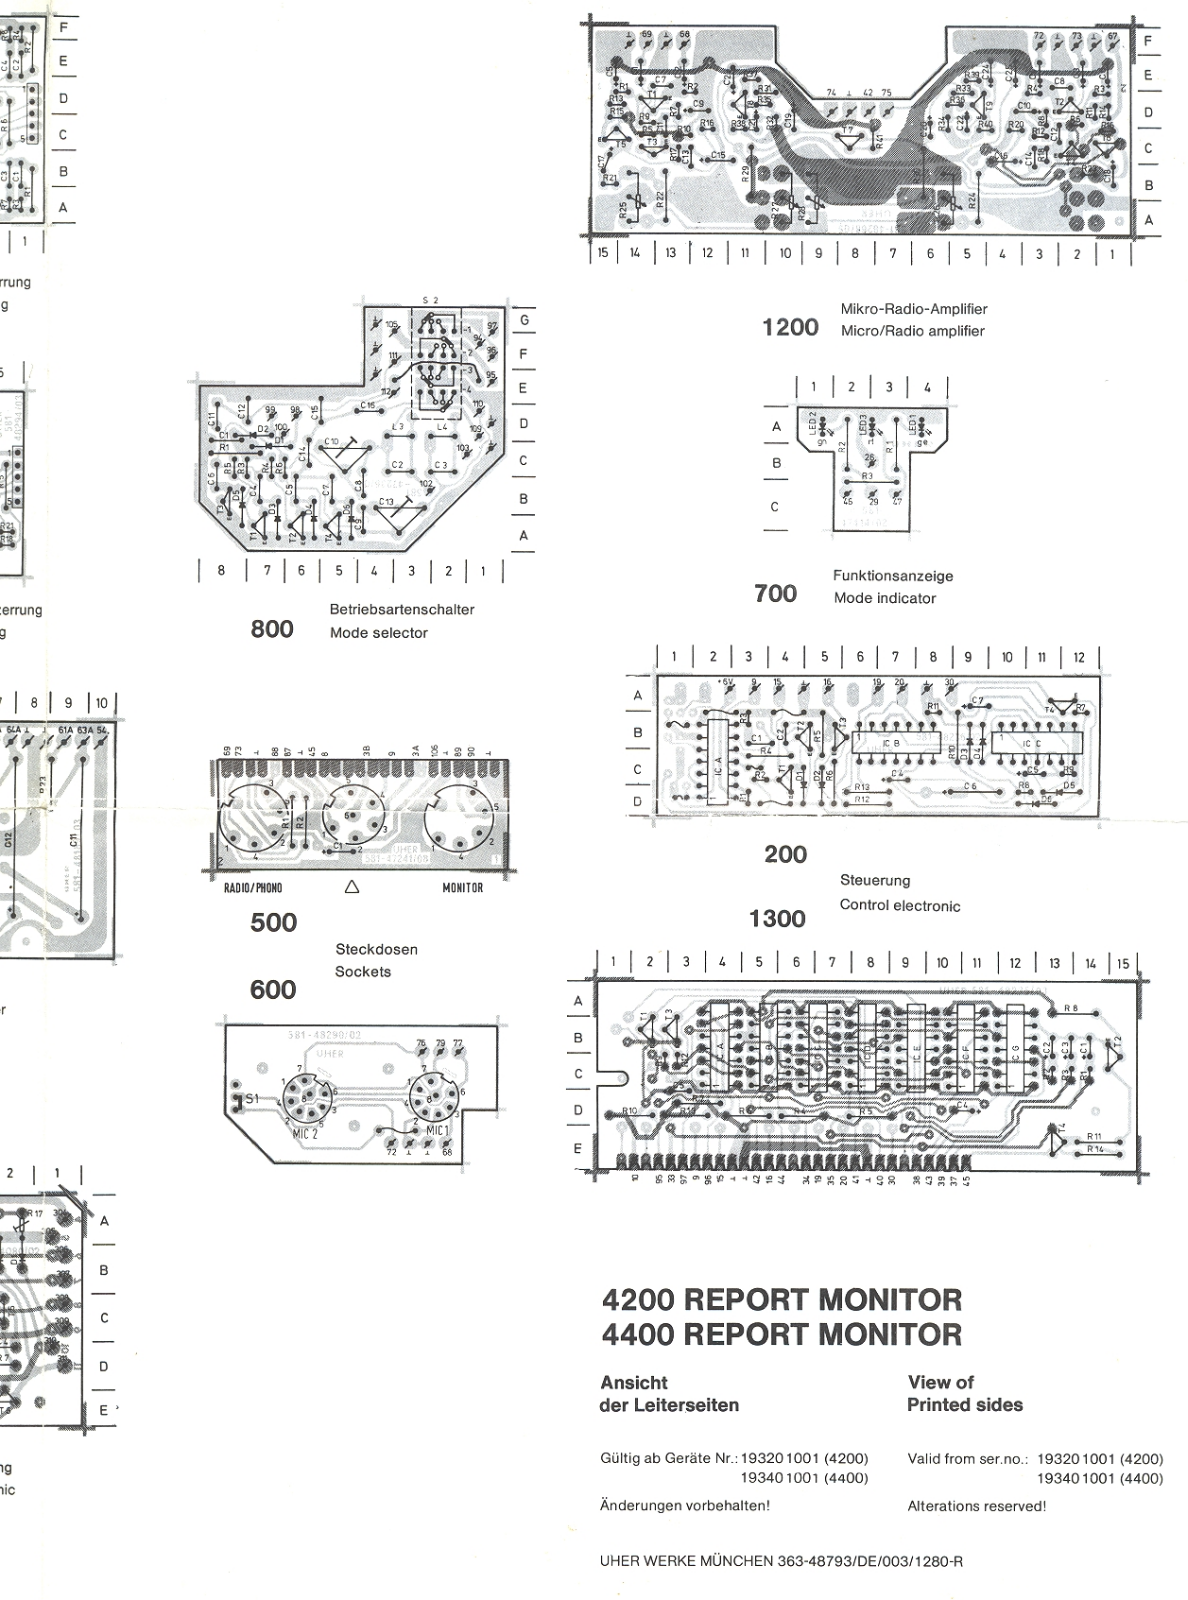 Uher 4400 Report Monitor Schematic